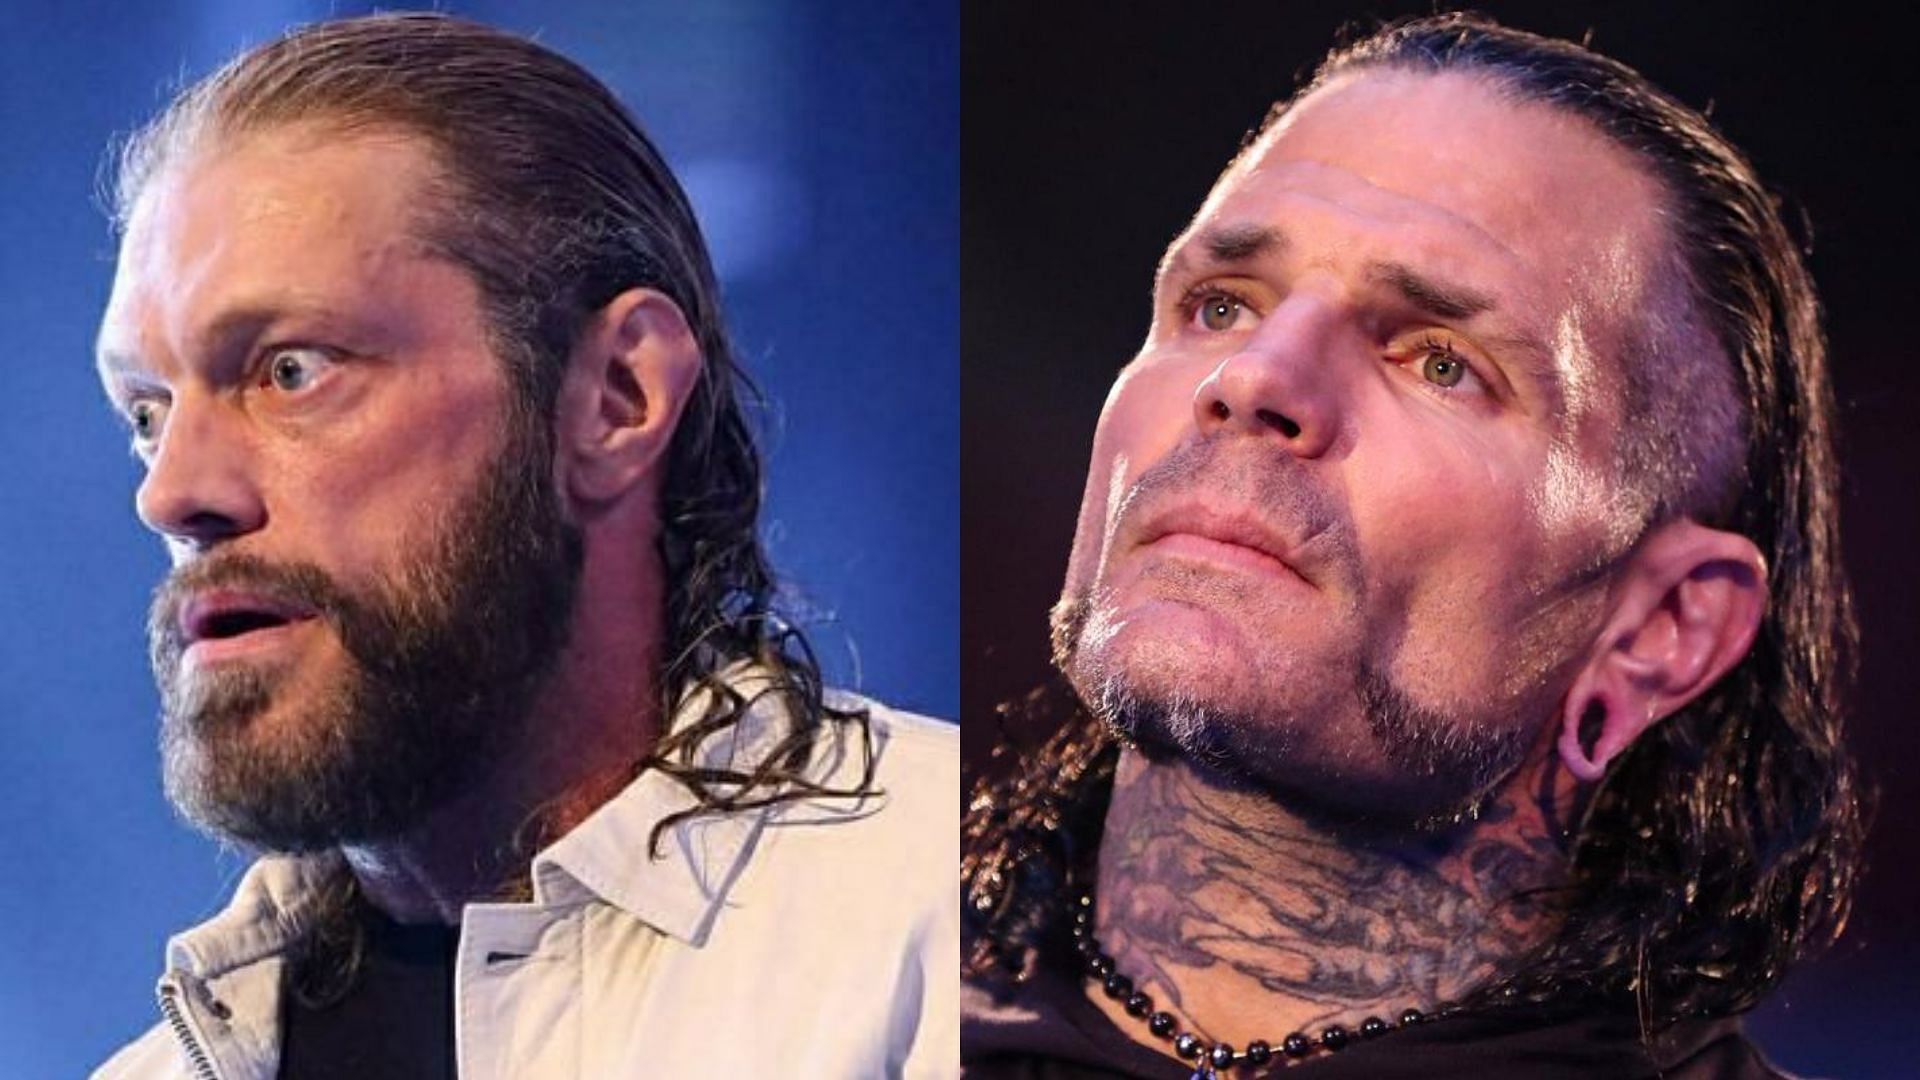 Edge and Jeff Hardy are two of the greatest WWE Superstars of all time.